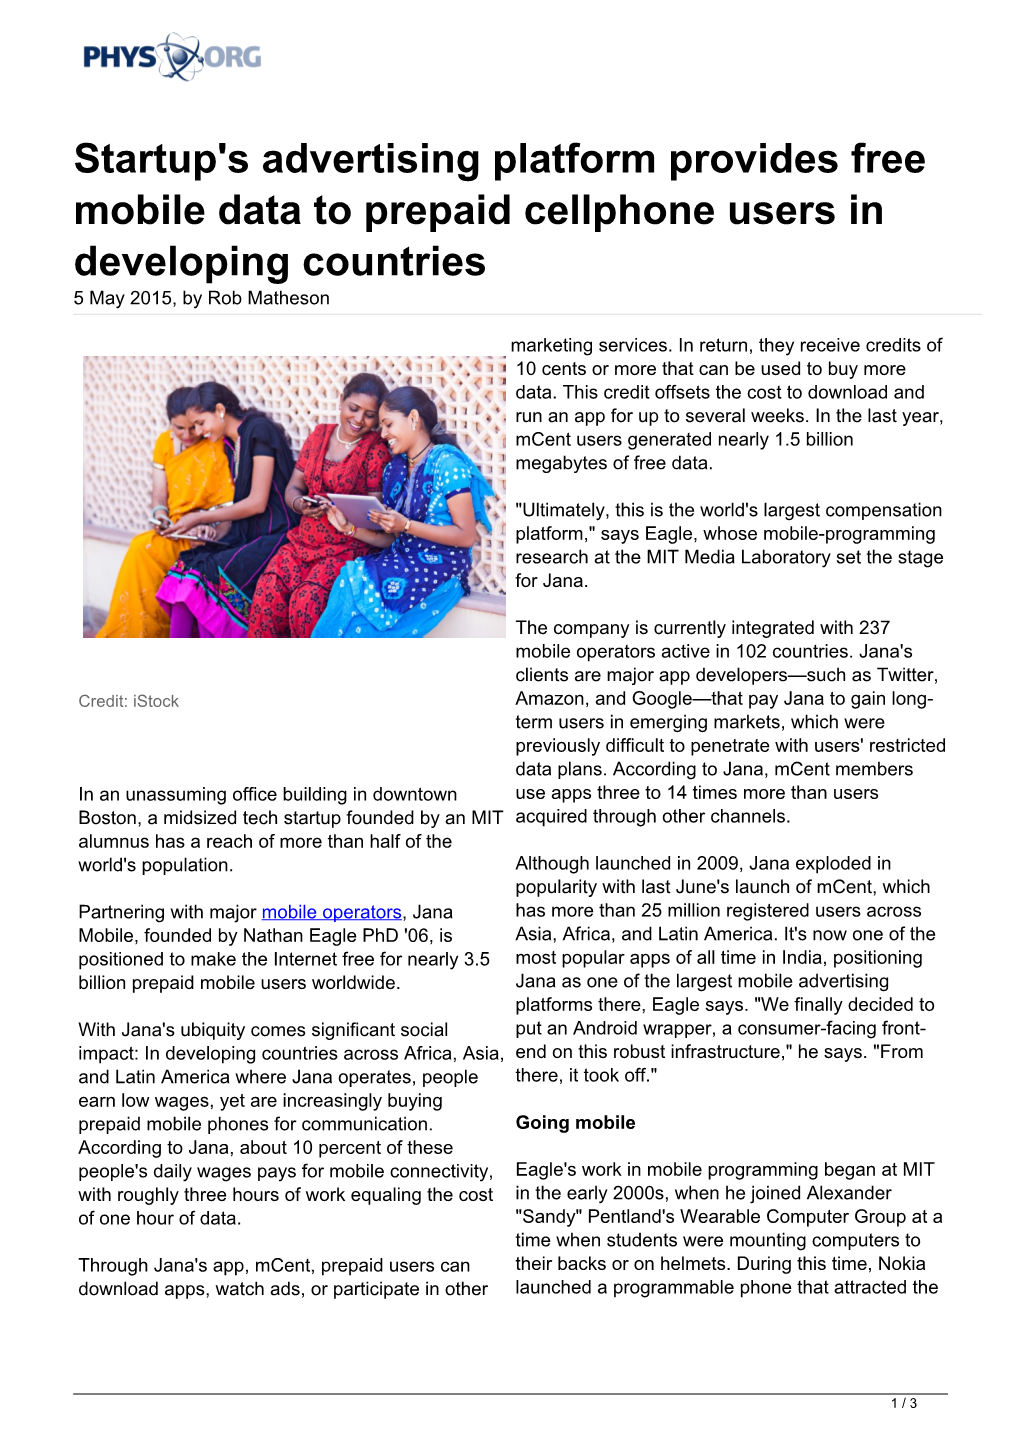 Startup's Advertising Platform Provides Free Mobile Data to Prepaid Cellphone Users in Developing Countries 5 May 2015, by Rob Matheson